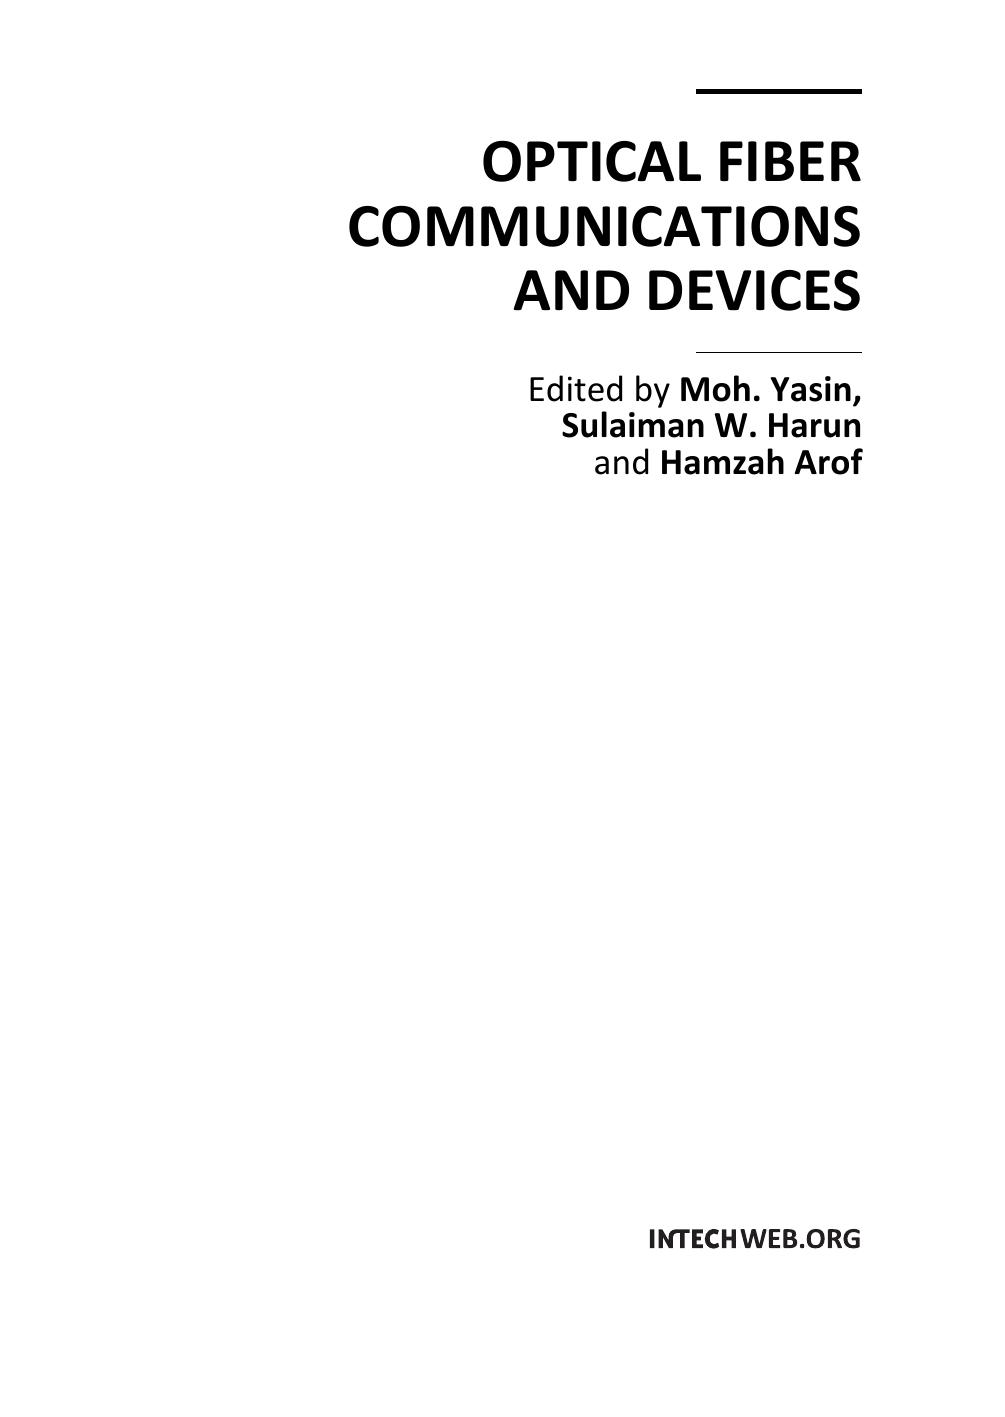 Optical Fiber Communications and Devices 2012.pdf